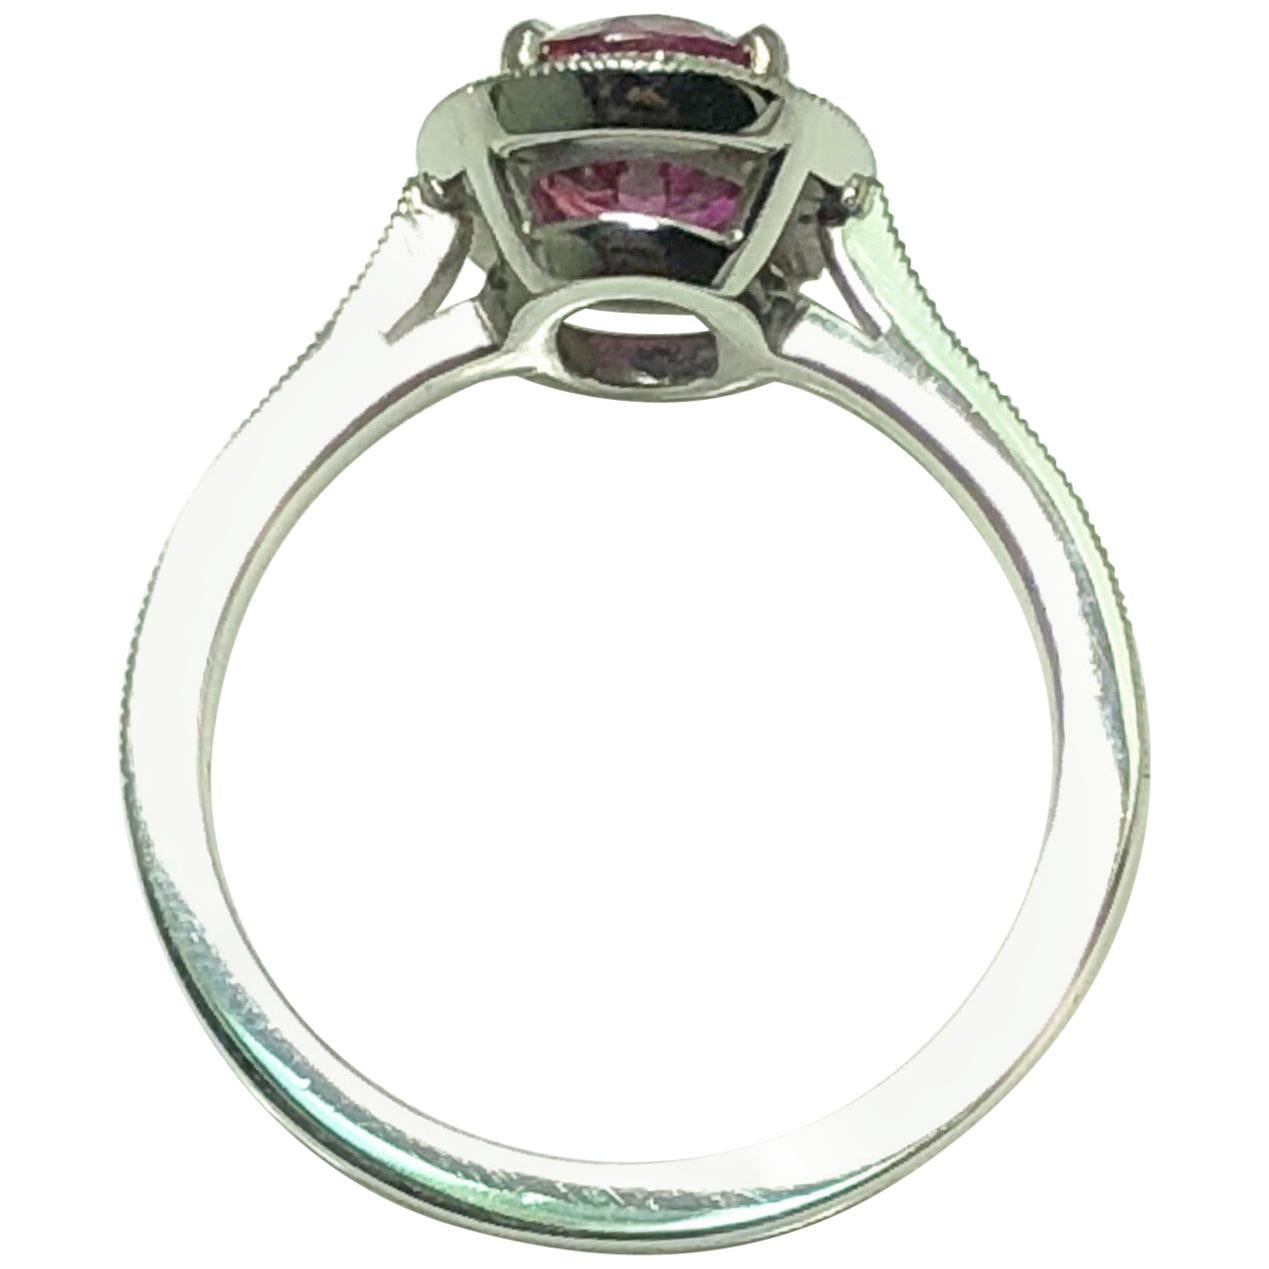 A Oval cut Ruby weighing 1.71 carats set in platinum. The ruby is set in a cluster of single cut diamonds with single cut diamond shoulders

The ring size is US 5 1/2.